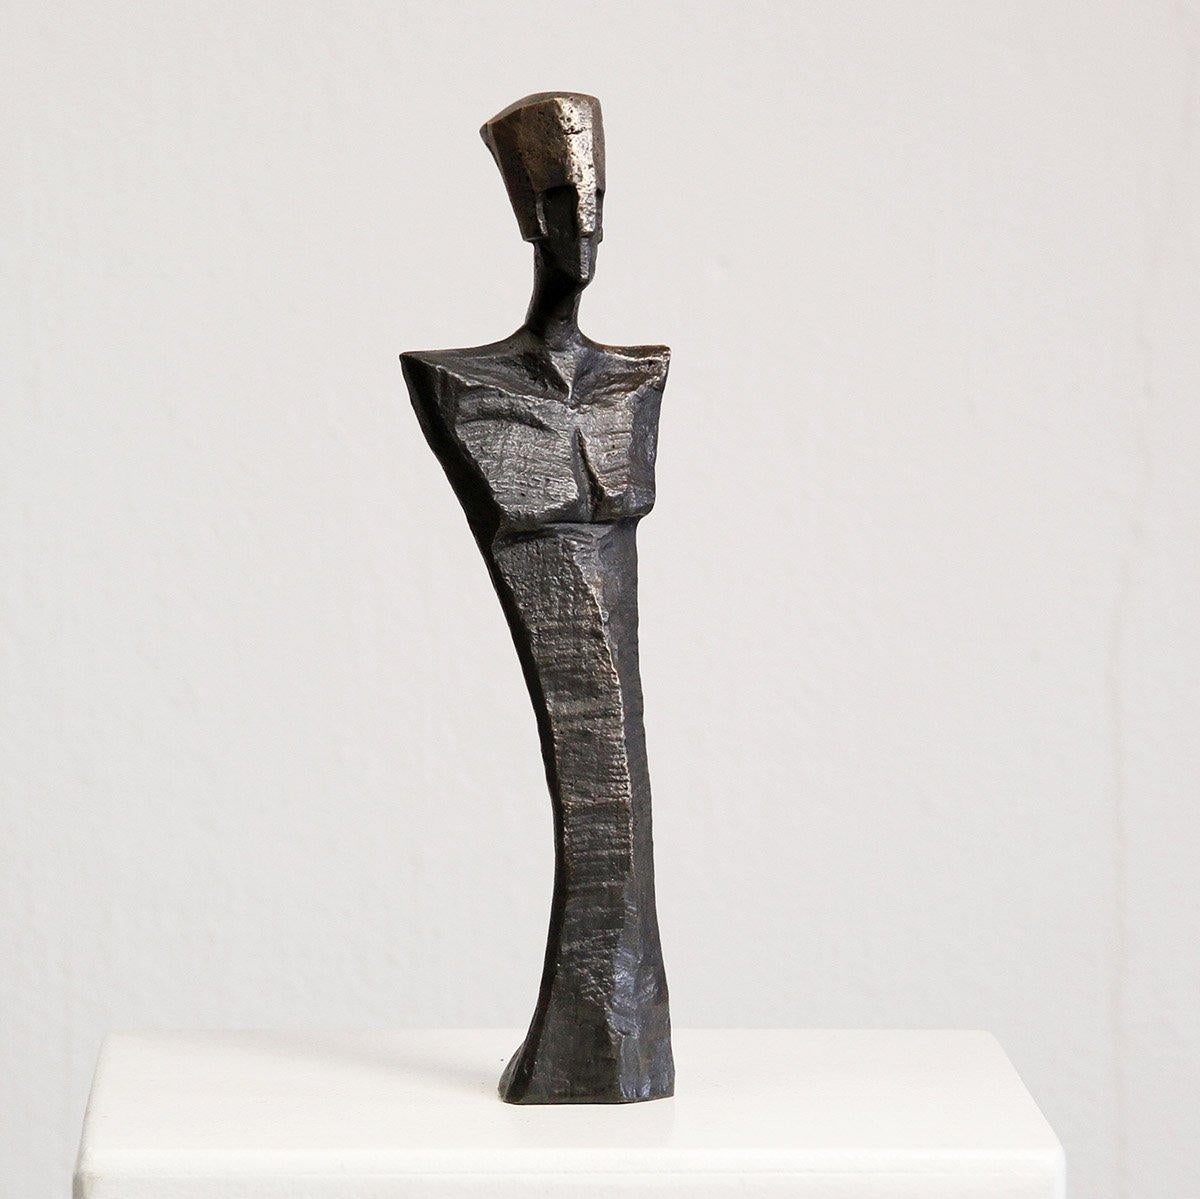 Torso of a King by Nando Kallweit.  Bronze sculpture, edition of 50. 

Often paired with the torso of a Queen.

Dimensions: 26cm x 7cm x 4cm